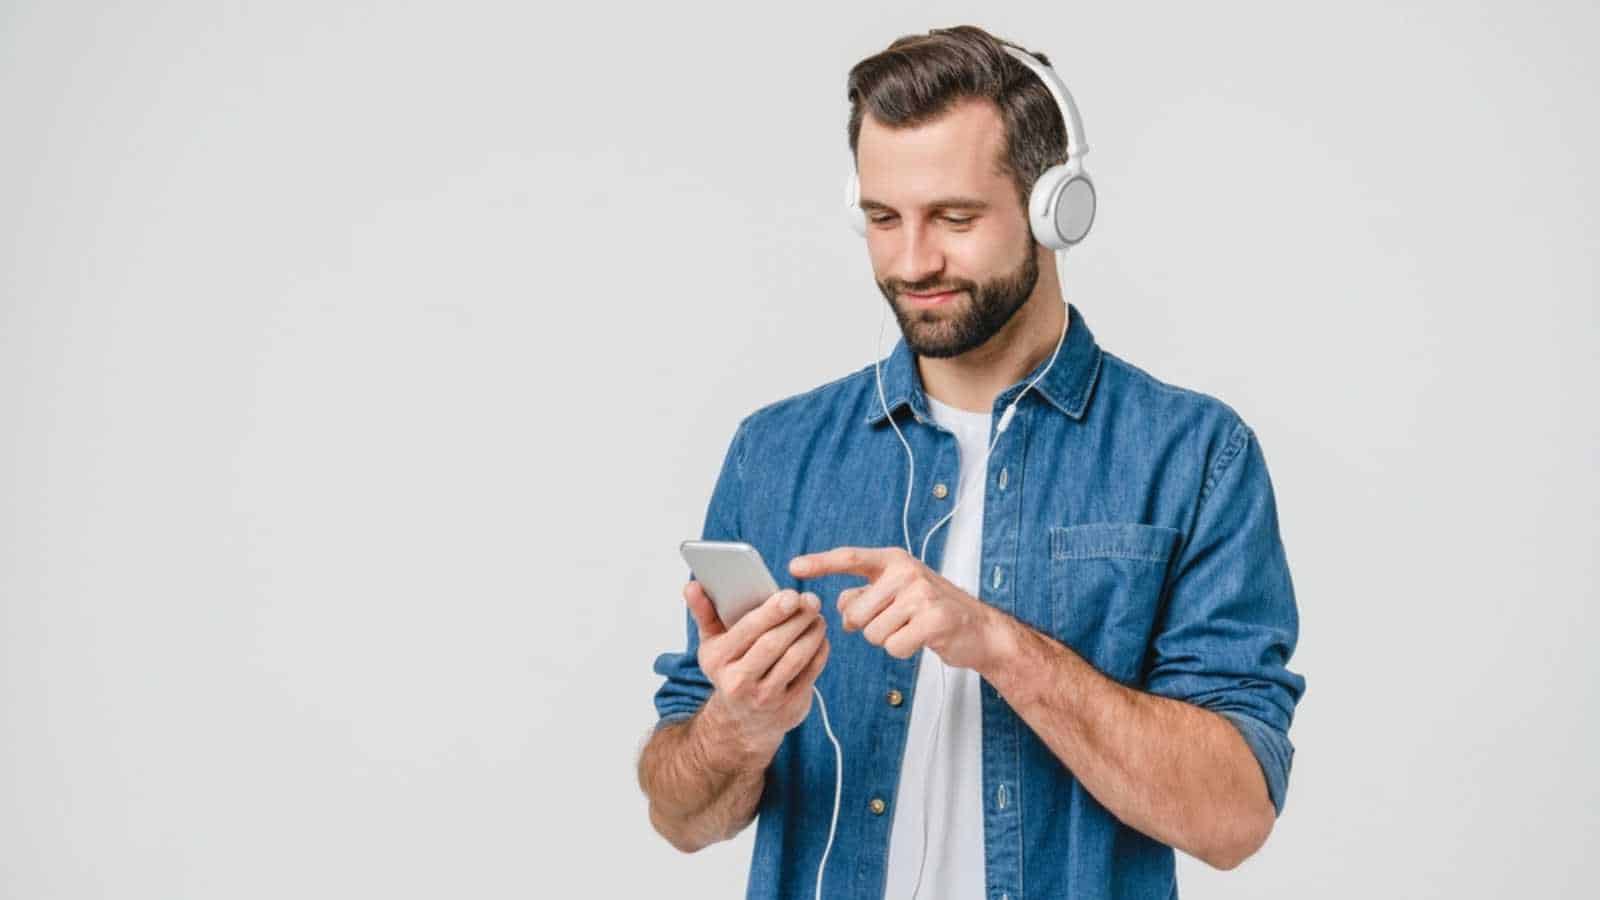 Man listening to podcast